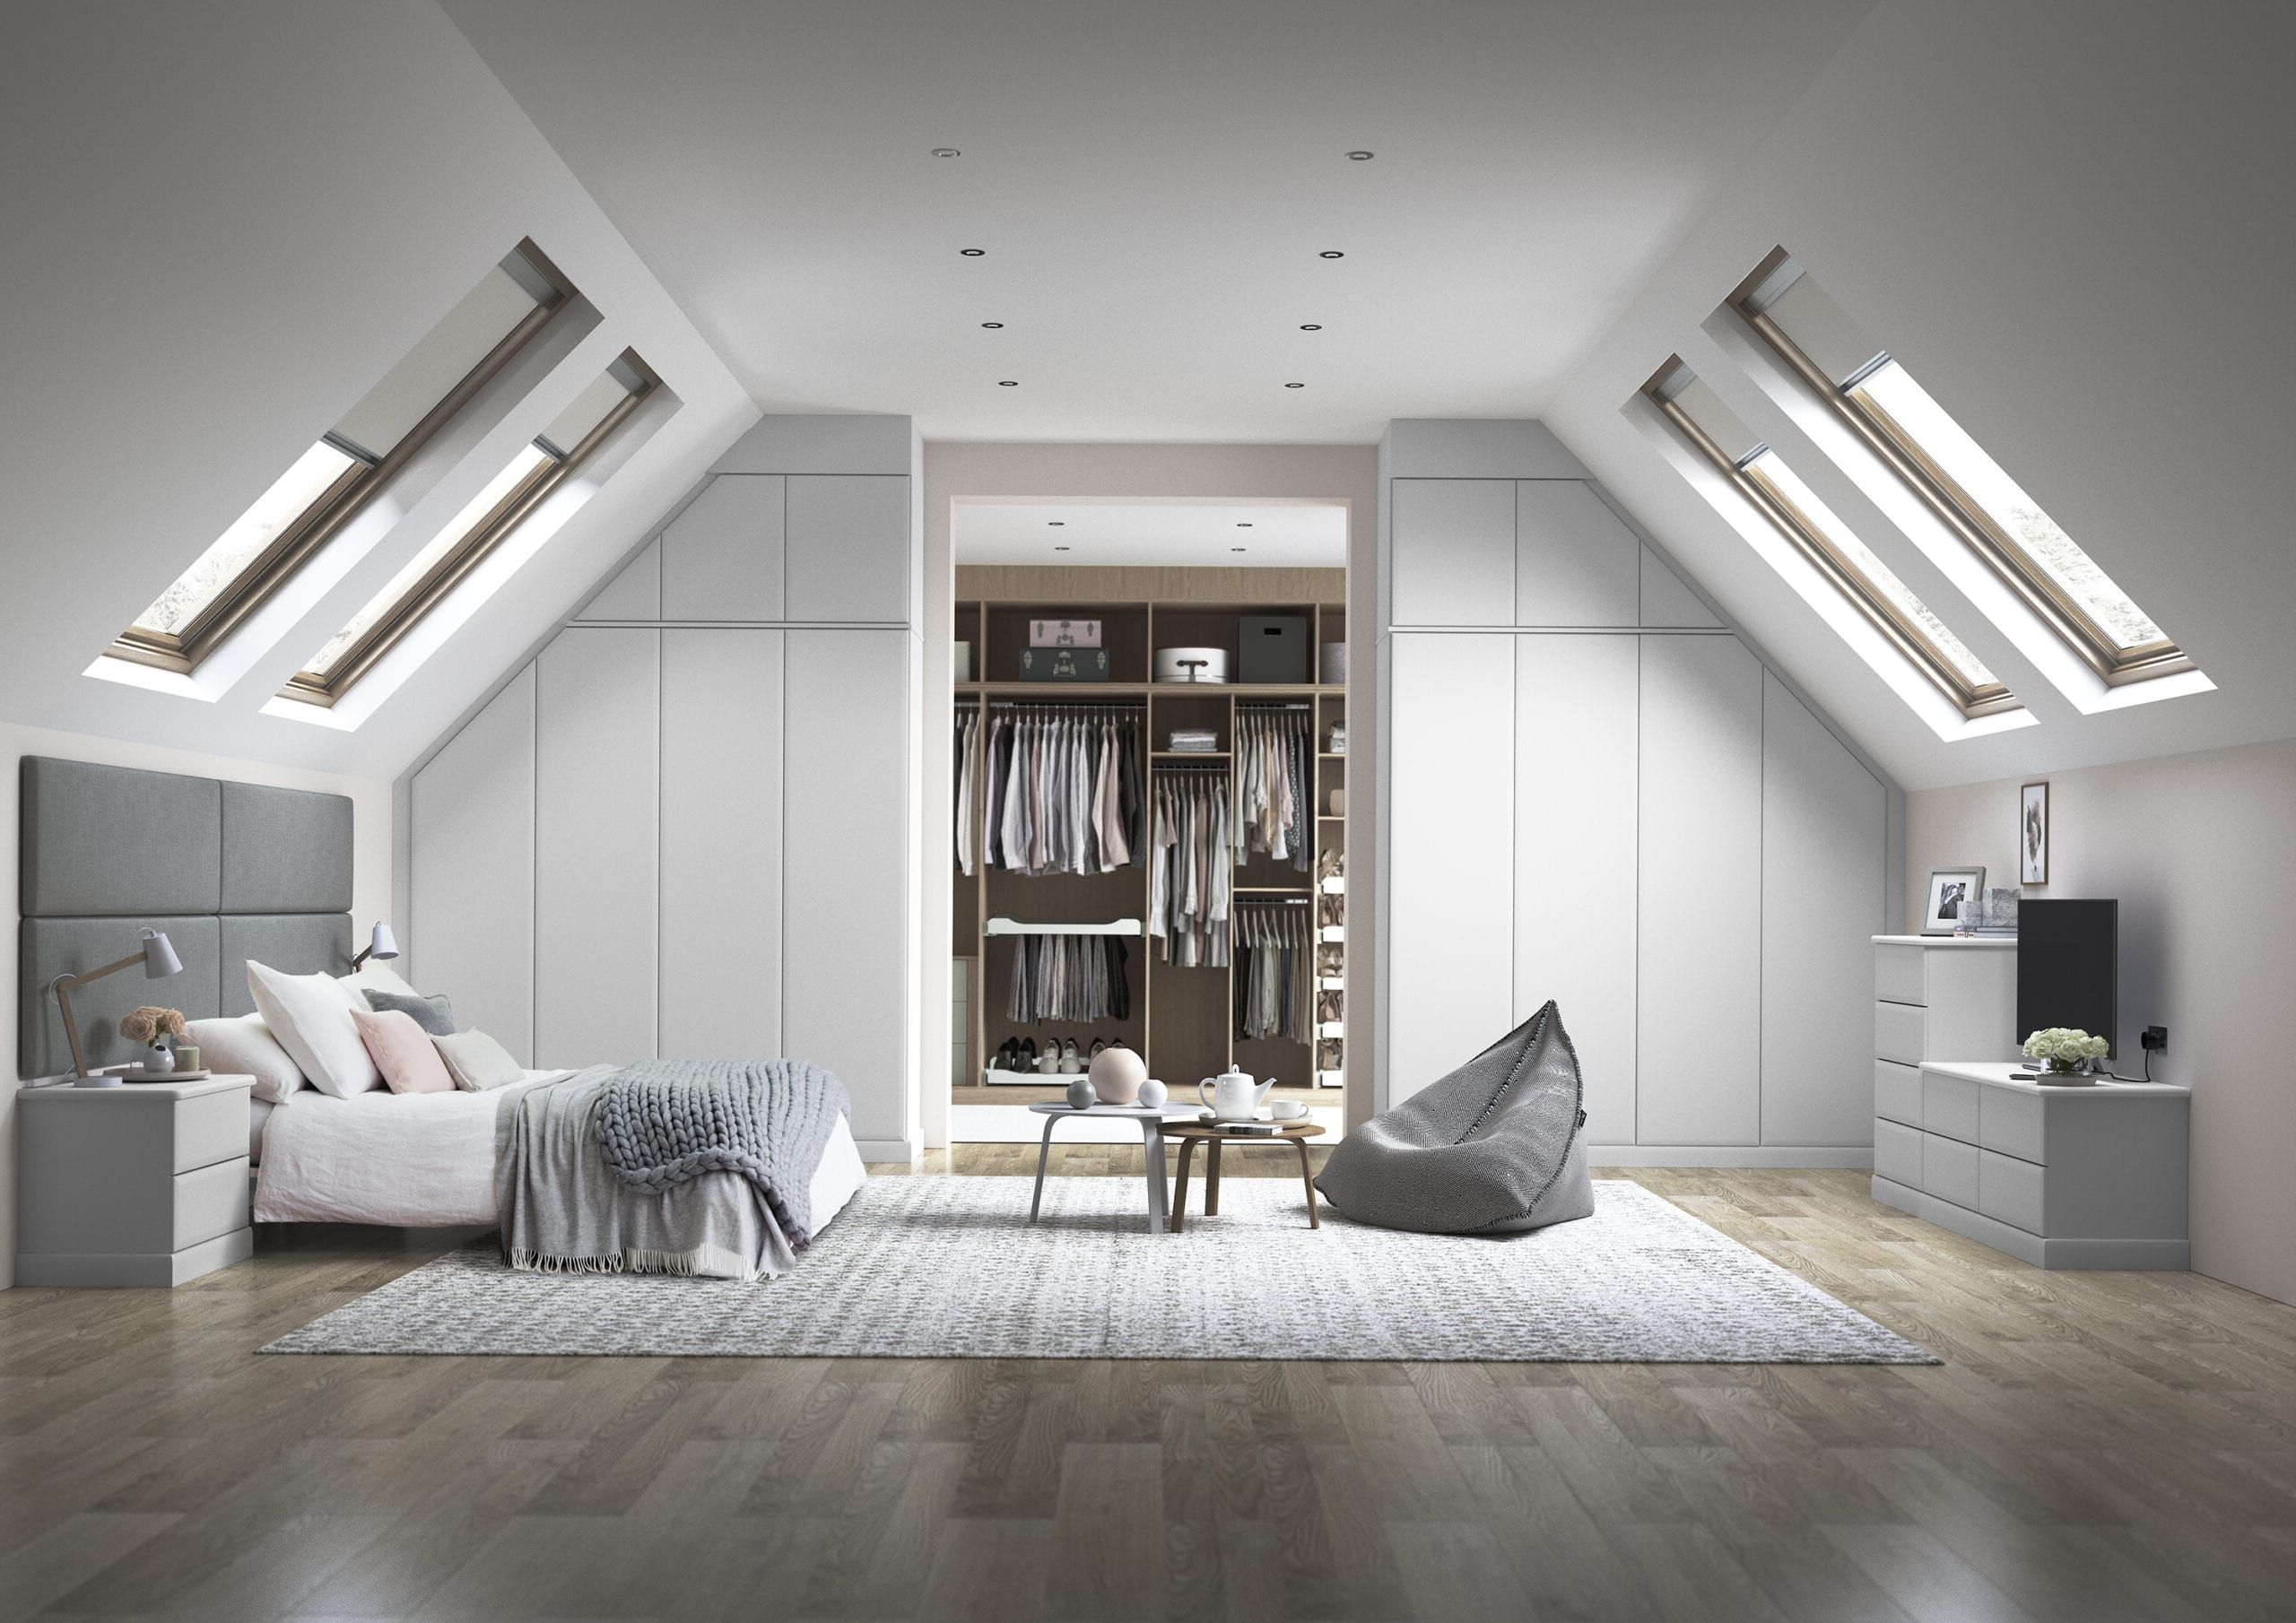 Most Popular Types Of Fitted Bedroom Wardrobes | Ashford Kitchens Pertaining To Bedroom Wardrobes (Gallery 16 of 20)